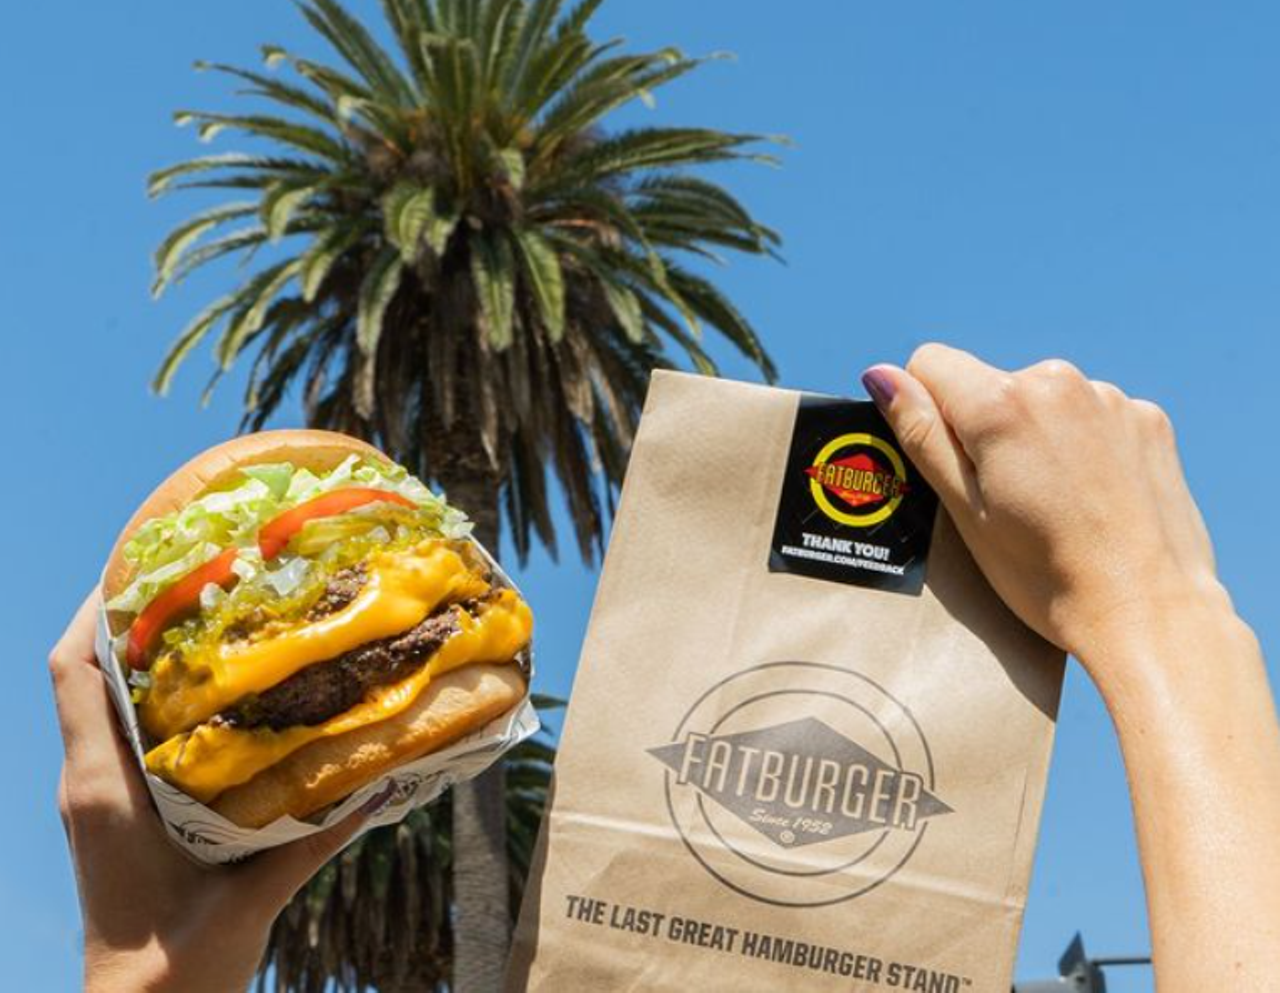 Fatburger
This iconic California chain has never made it east of of the Mississippi River. So it was a bit of a shock when they announced their intentions to open 10 Florida stores, including one in Orlando. Great things apparently take time, however, as the Fatburger ownership group said they expect the Florida operation to take six years to open all 10 stores.